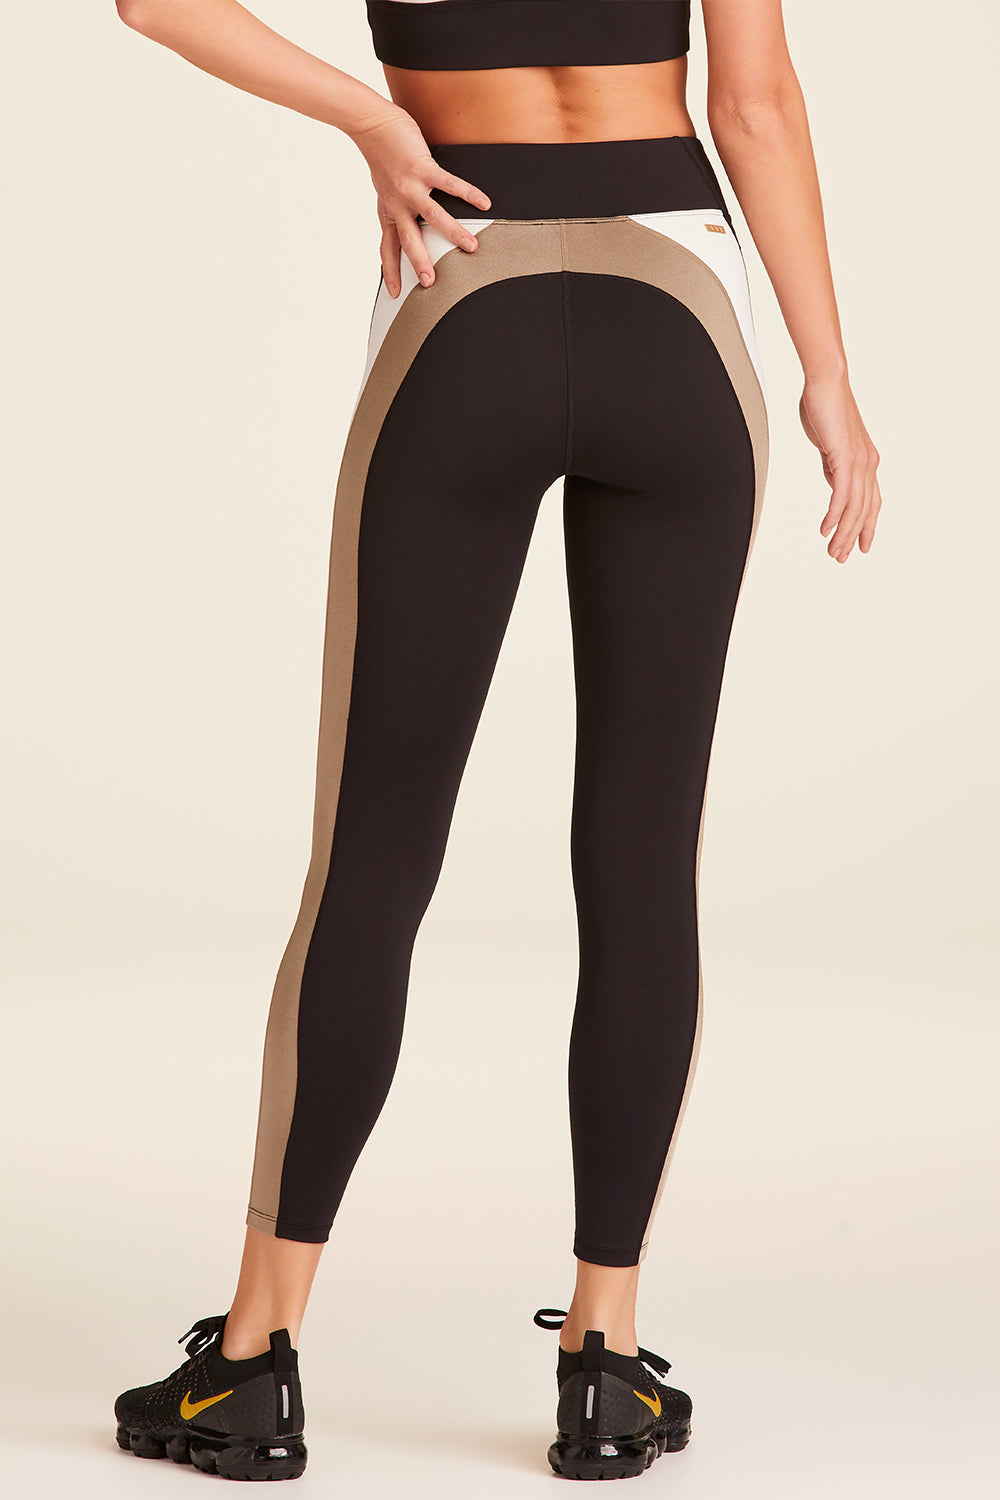 Back view of Alala Luxury Women's Athleisure bolt tight in black, gold, and bone